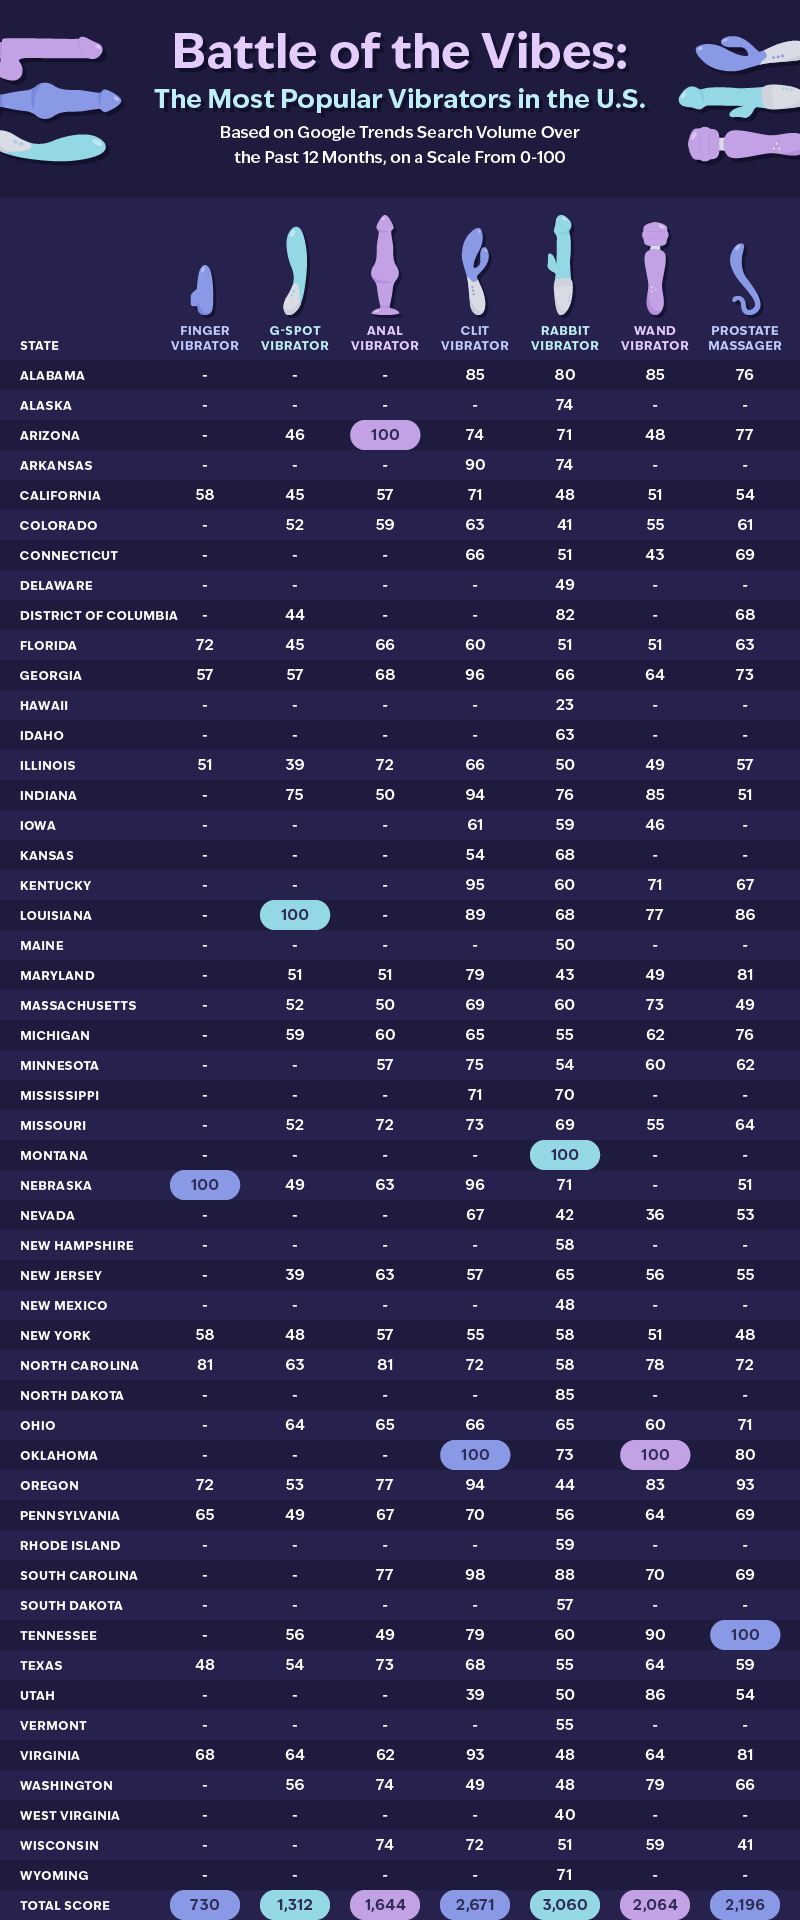 a table highlighting the most popular vibrators across the U.S.